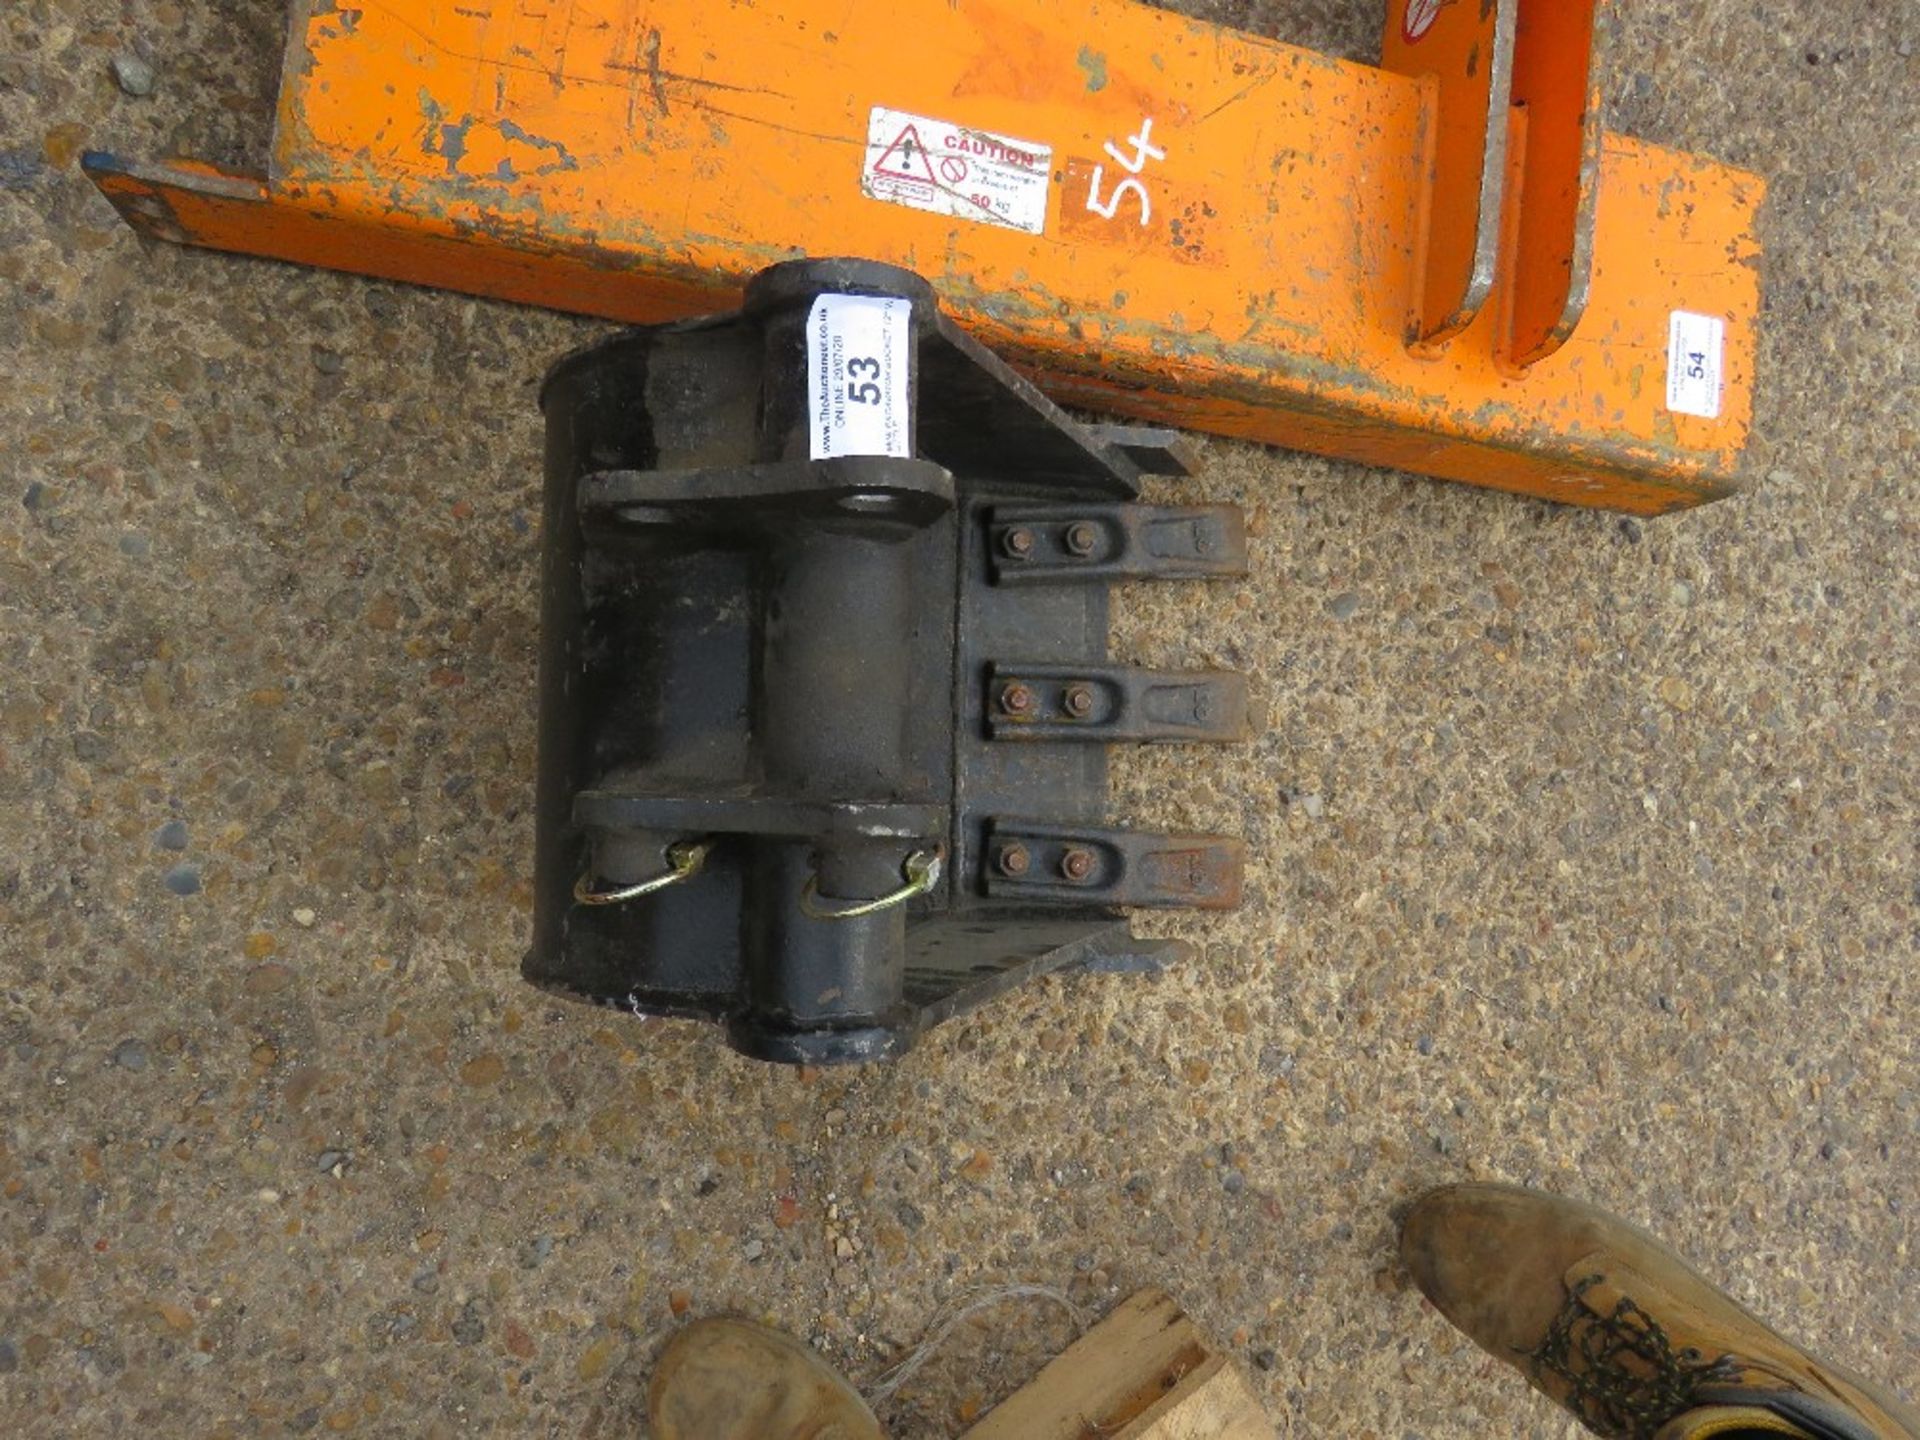 MINI EXCAVATOR BUCKET 12" WIDTH, LITTLE USED. 25MM PINS. DIRECT FROM LOCAL COMPANY DUE TO DEPOT CLOS - Image 2 of 2